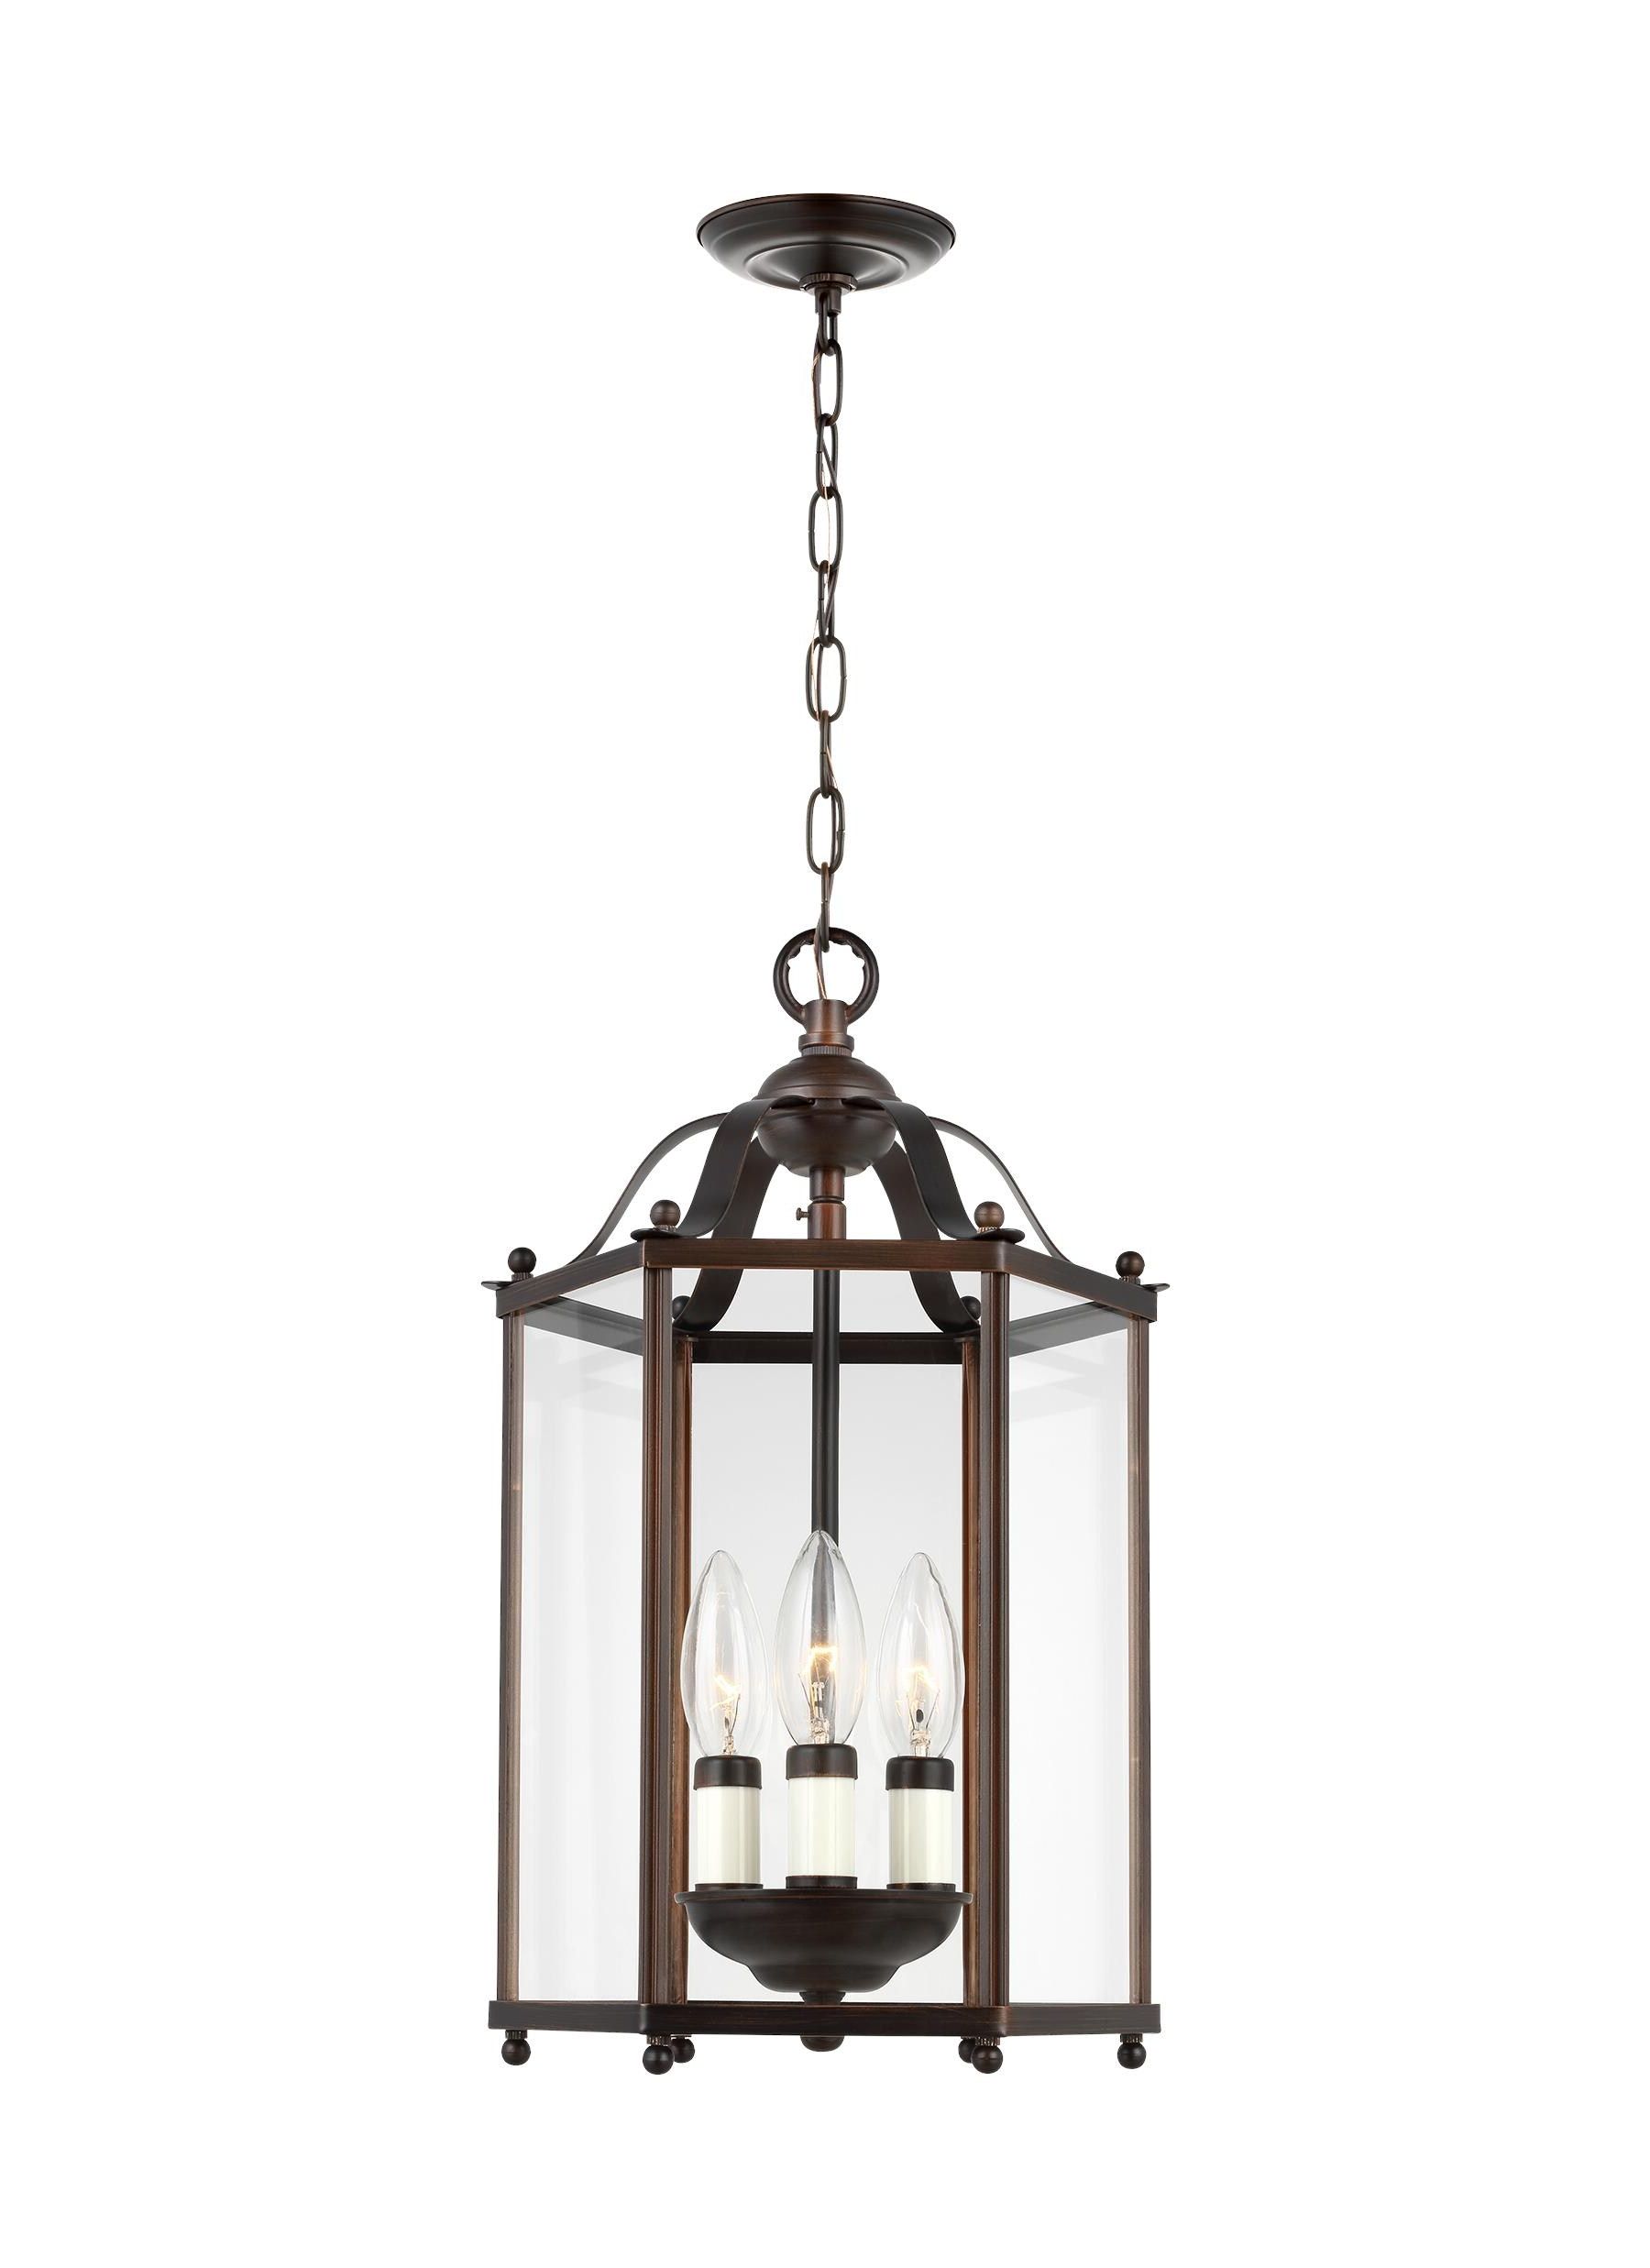 Lantern Chandeliers With Clear Glass Regarding Most Recently Released Sea Gull Lighting Bretton 2 Light Bronze Traditional Clear Glass Lantern  Pendant Light In The Pendant Lighting Department At Lowes (View 8 of 15)